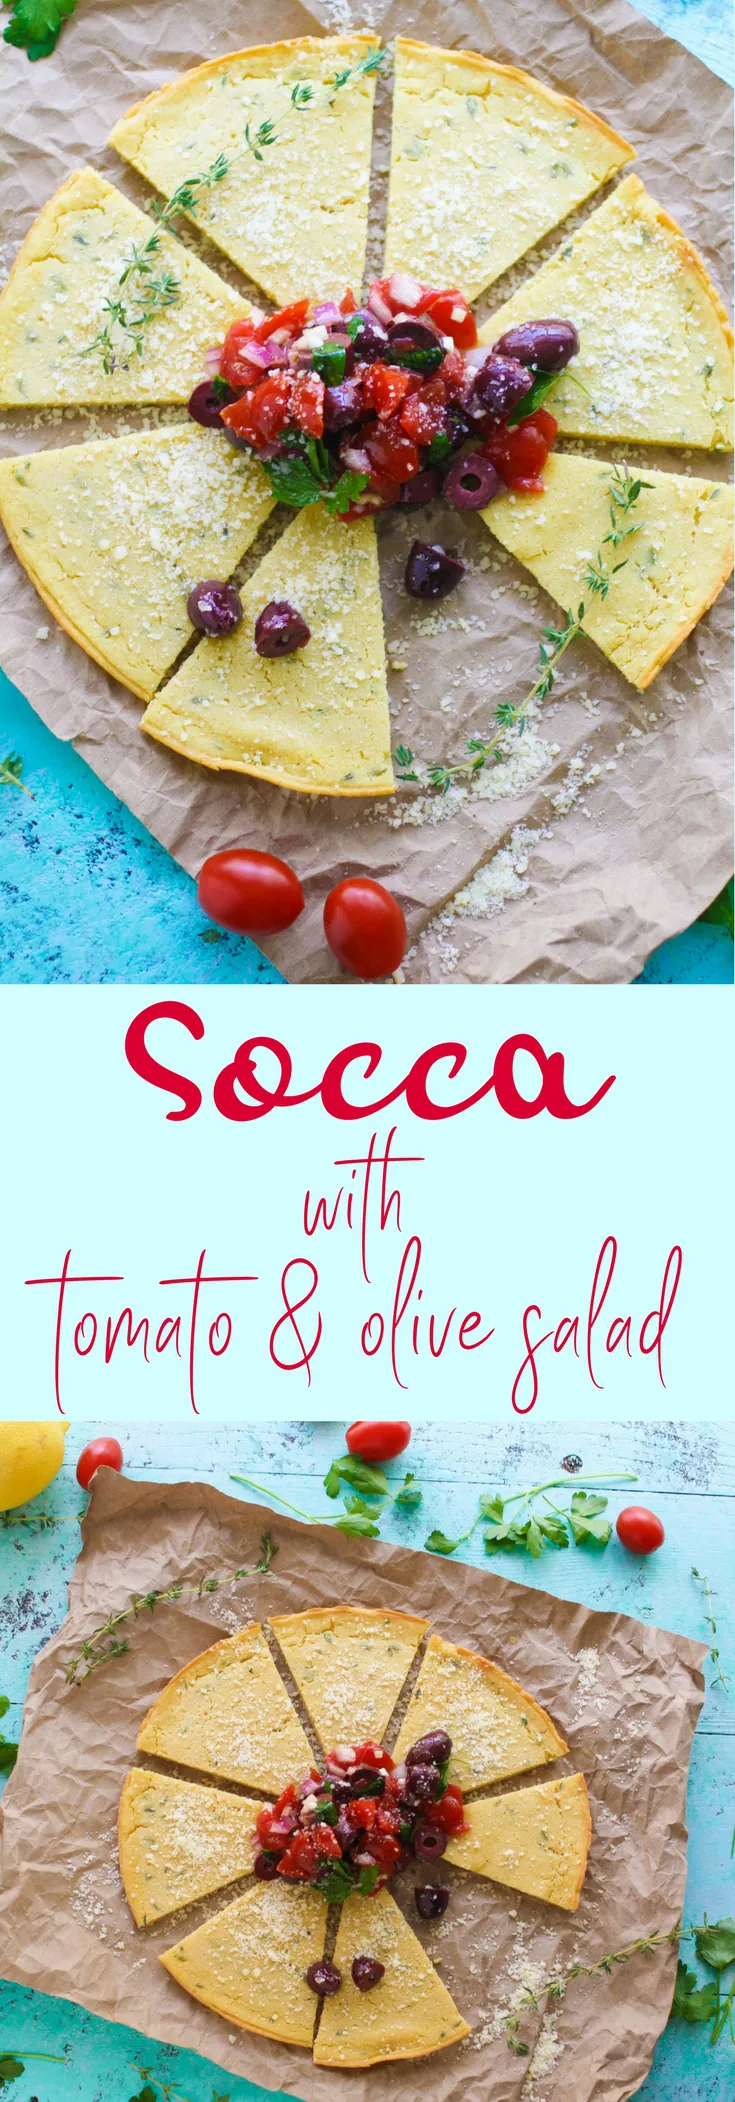 Socca (Chickpea Flour) Flatbread with Tomato and Olive Salad should be your next savory snack! You'll adore this gluten-free Socca (Chickpea Flour) Flatbread with Tomato and Olive Salad!